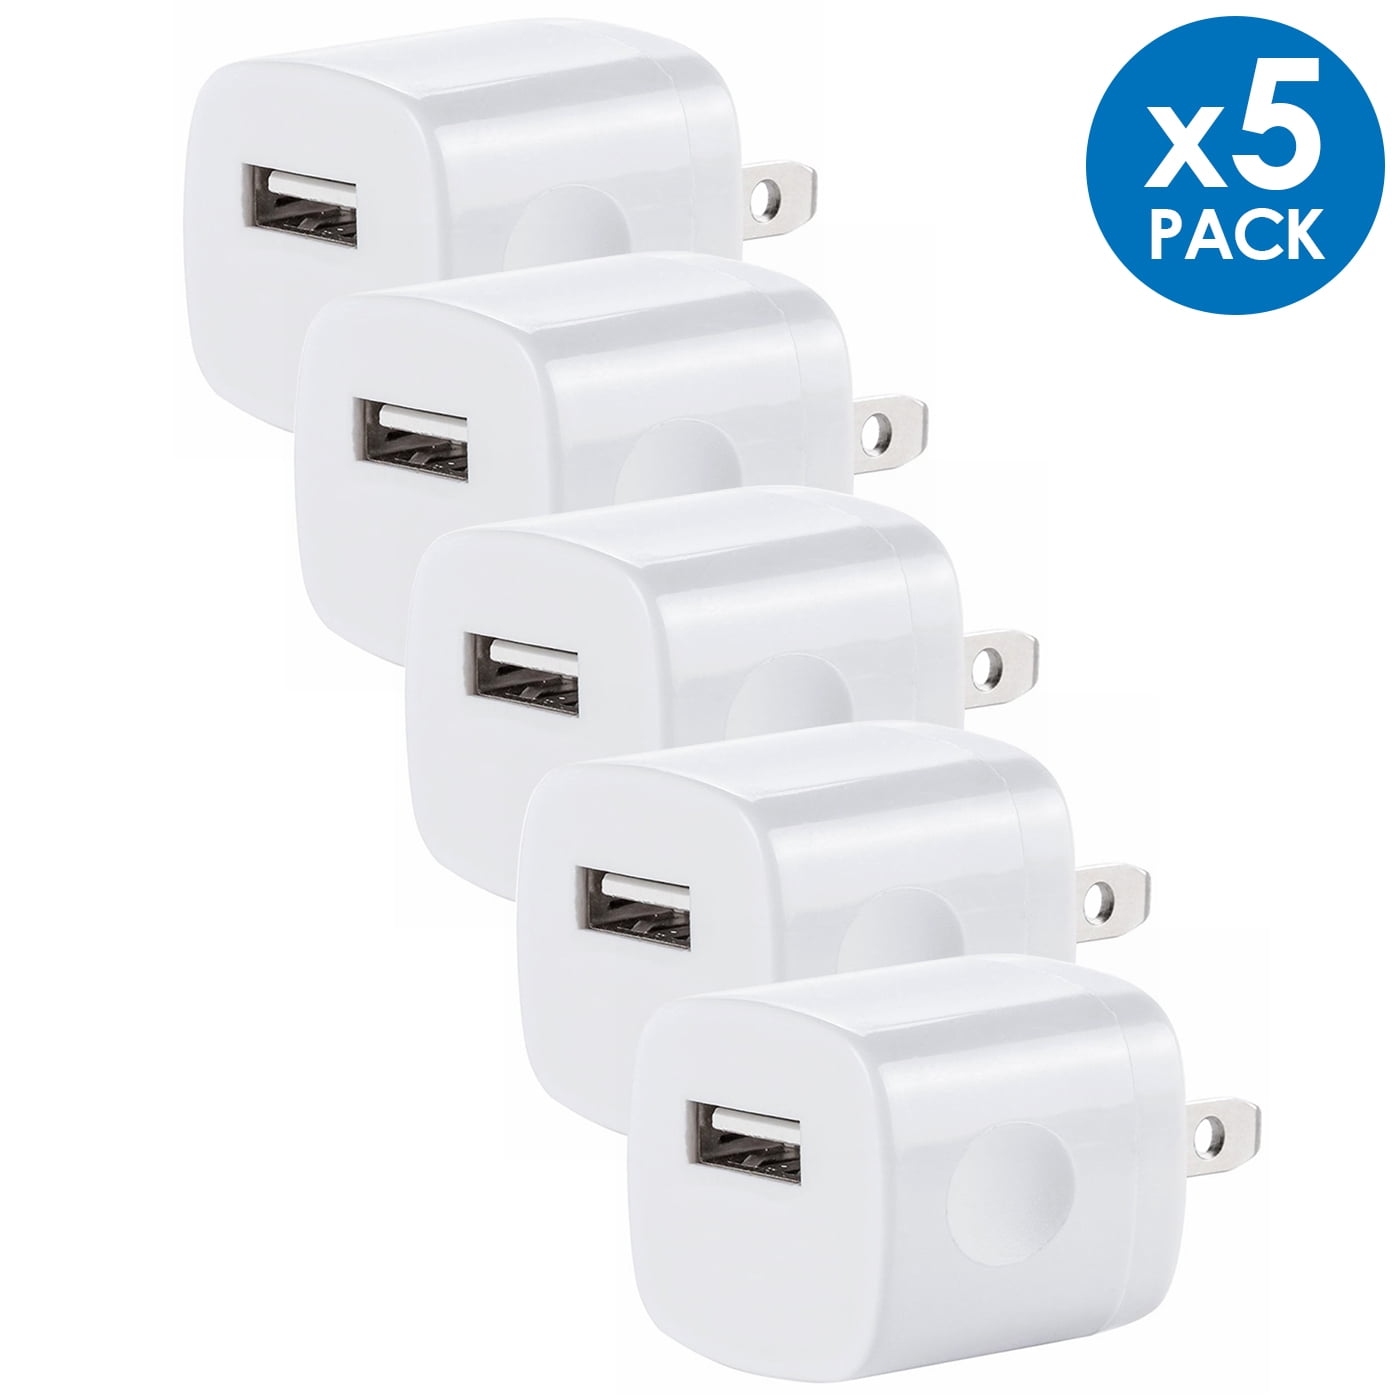 USB Wall Charger Adapter 1A/5V 5-Pack Travel USB Plug Charging Block Brick Charger Power Adapter Cube Compatible with XS/XS Max/X/8/7/6 Plus, Galaxy S9/S8/S8 Plus, Moto, LG, HTC, Google - Walmart.com